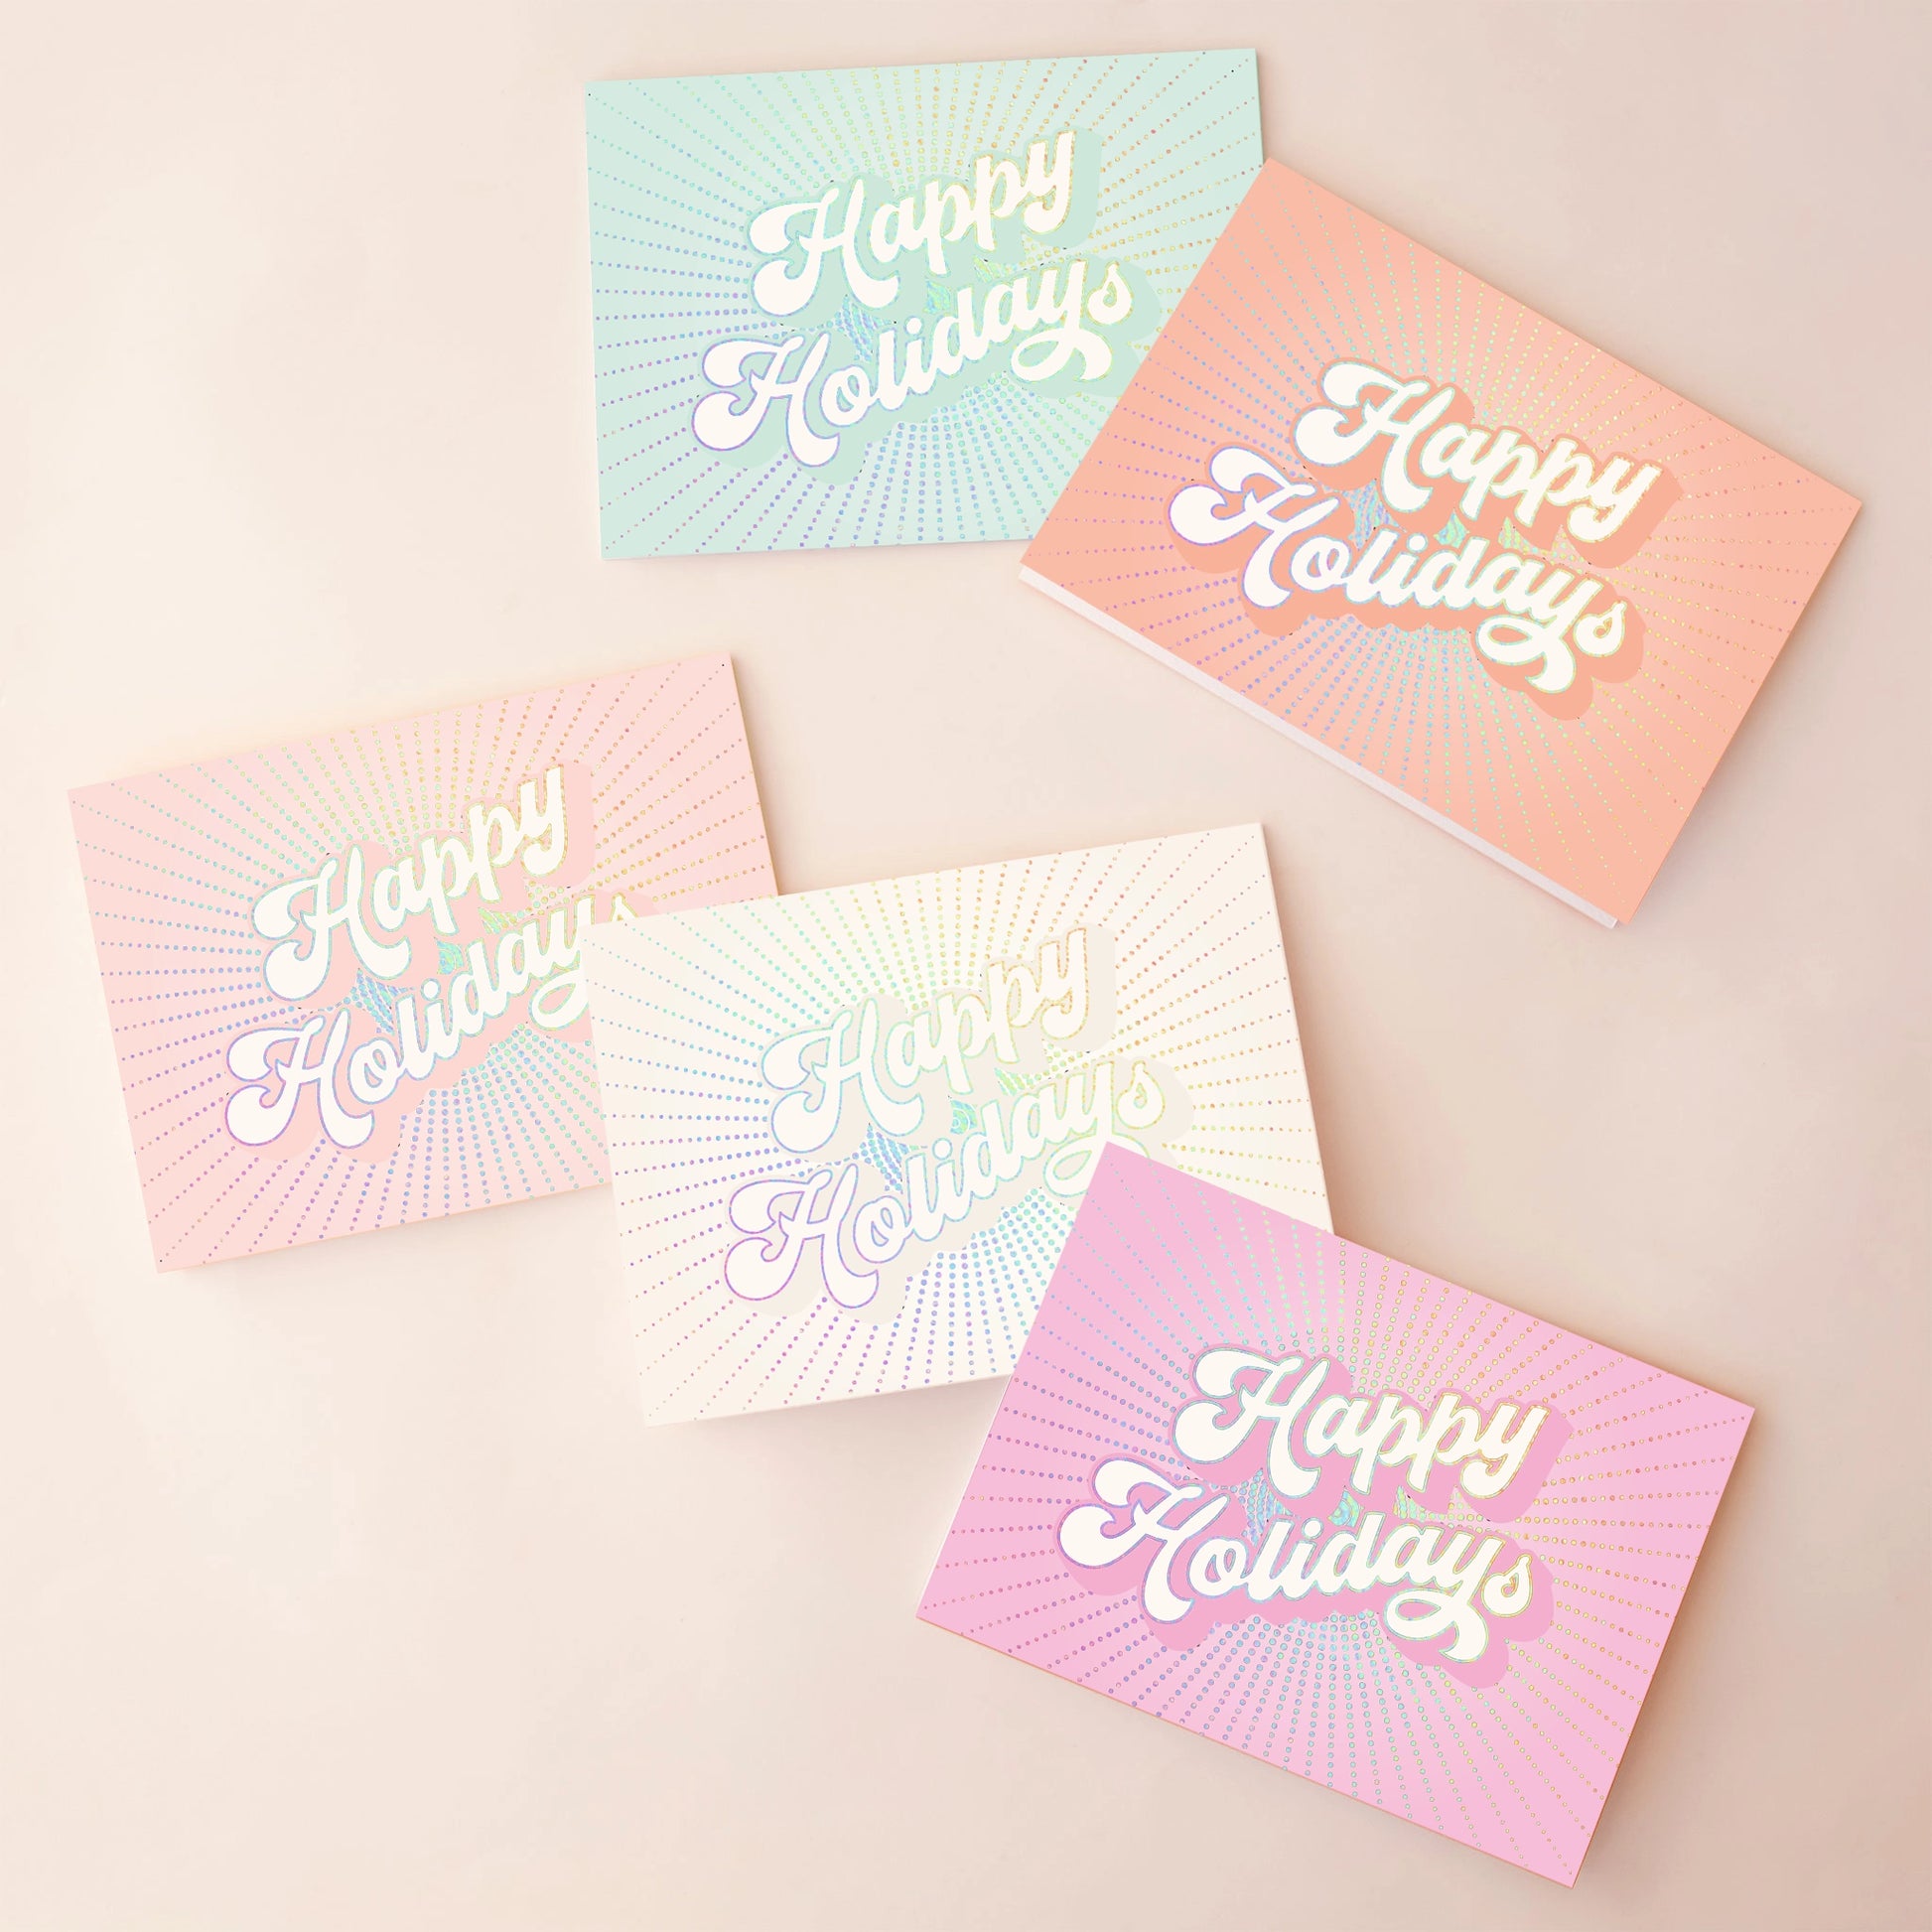 On an ivory background is a 5 pack of holiday greeting cards in shades of pink, ivory, blue, orange and hot pink. 